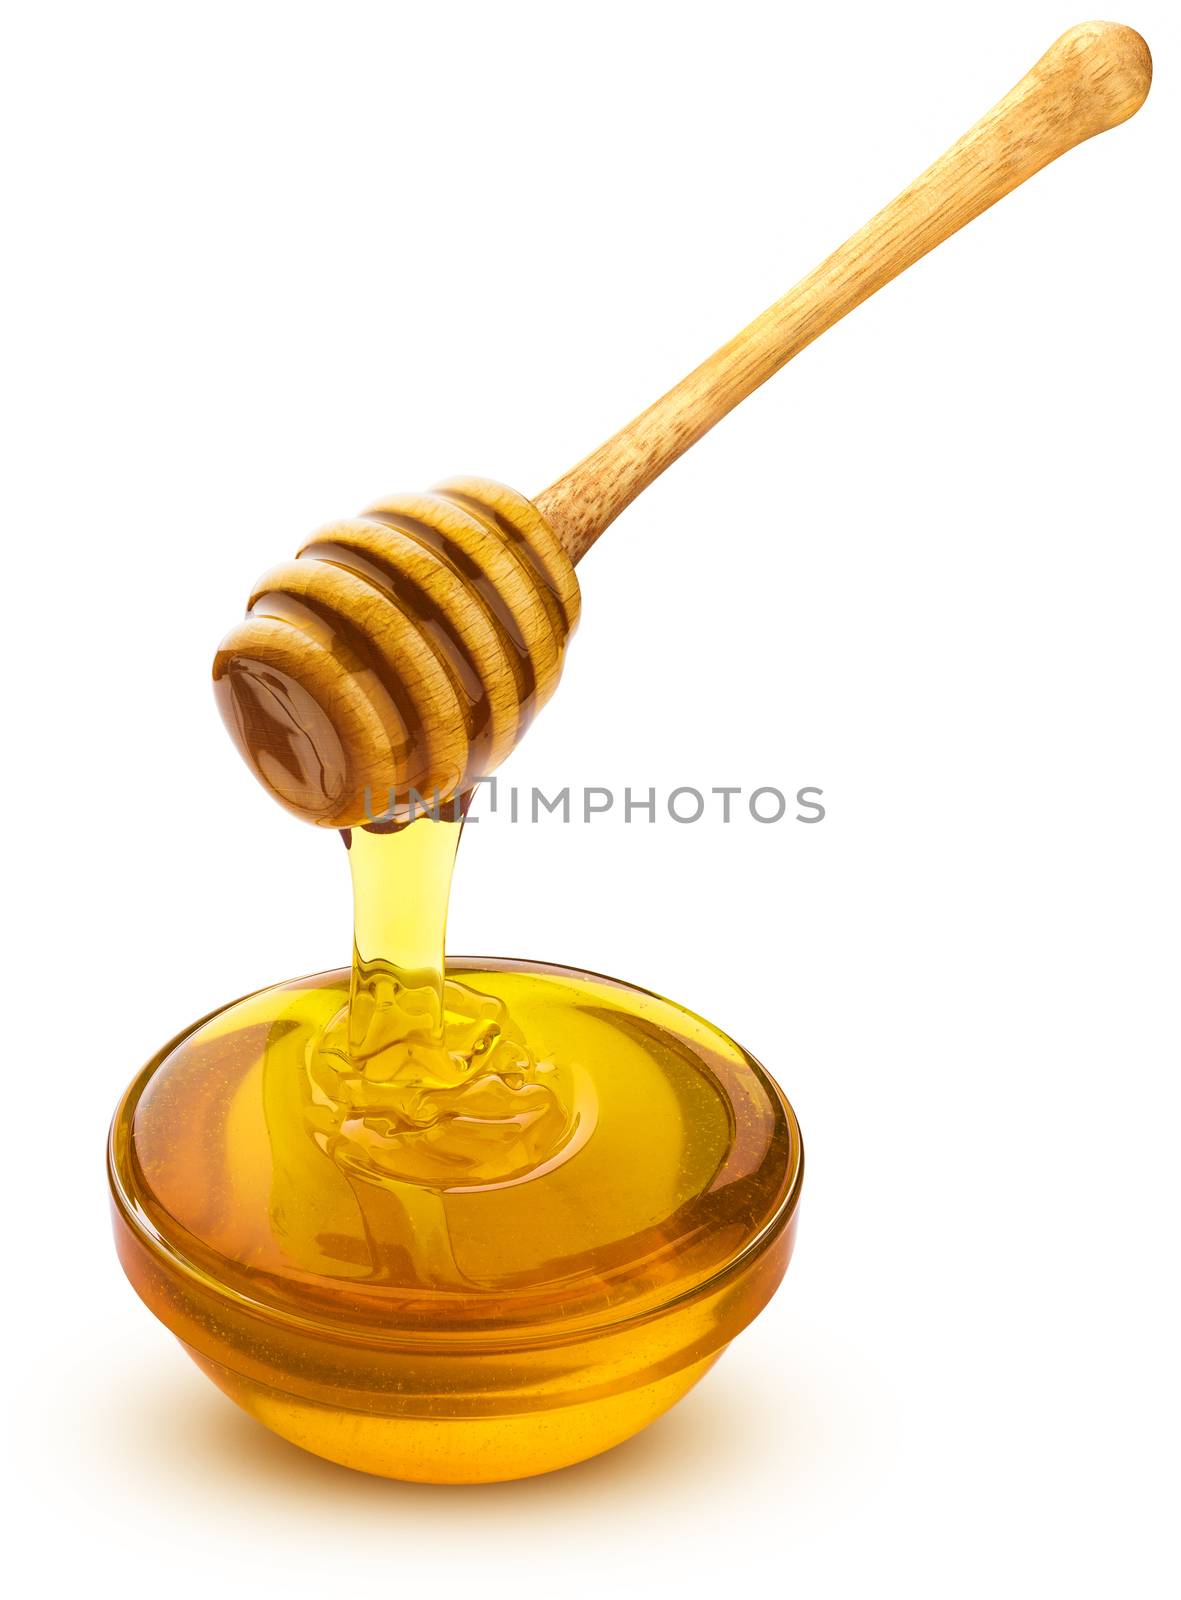 Honey dipper and bowl of pouring honey isolated on white background by xamtiw